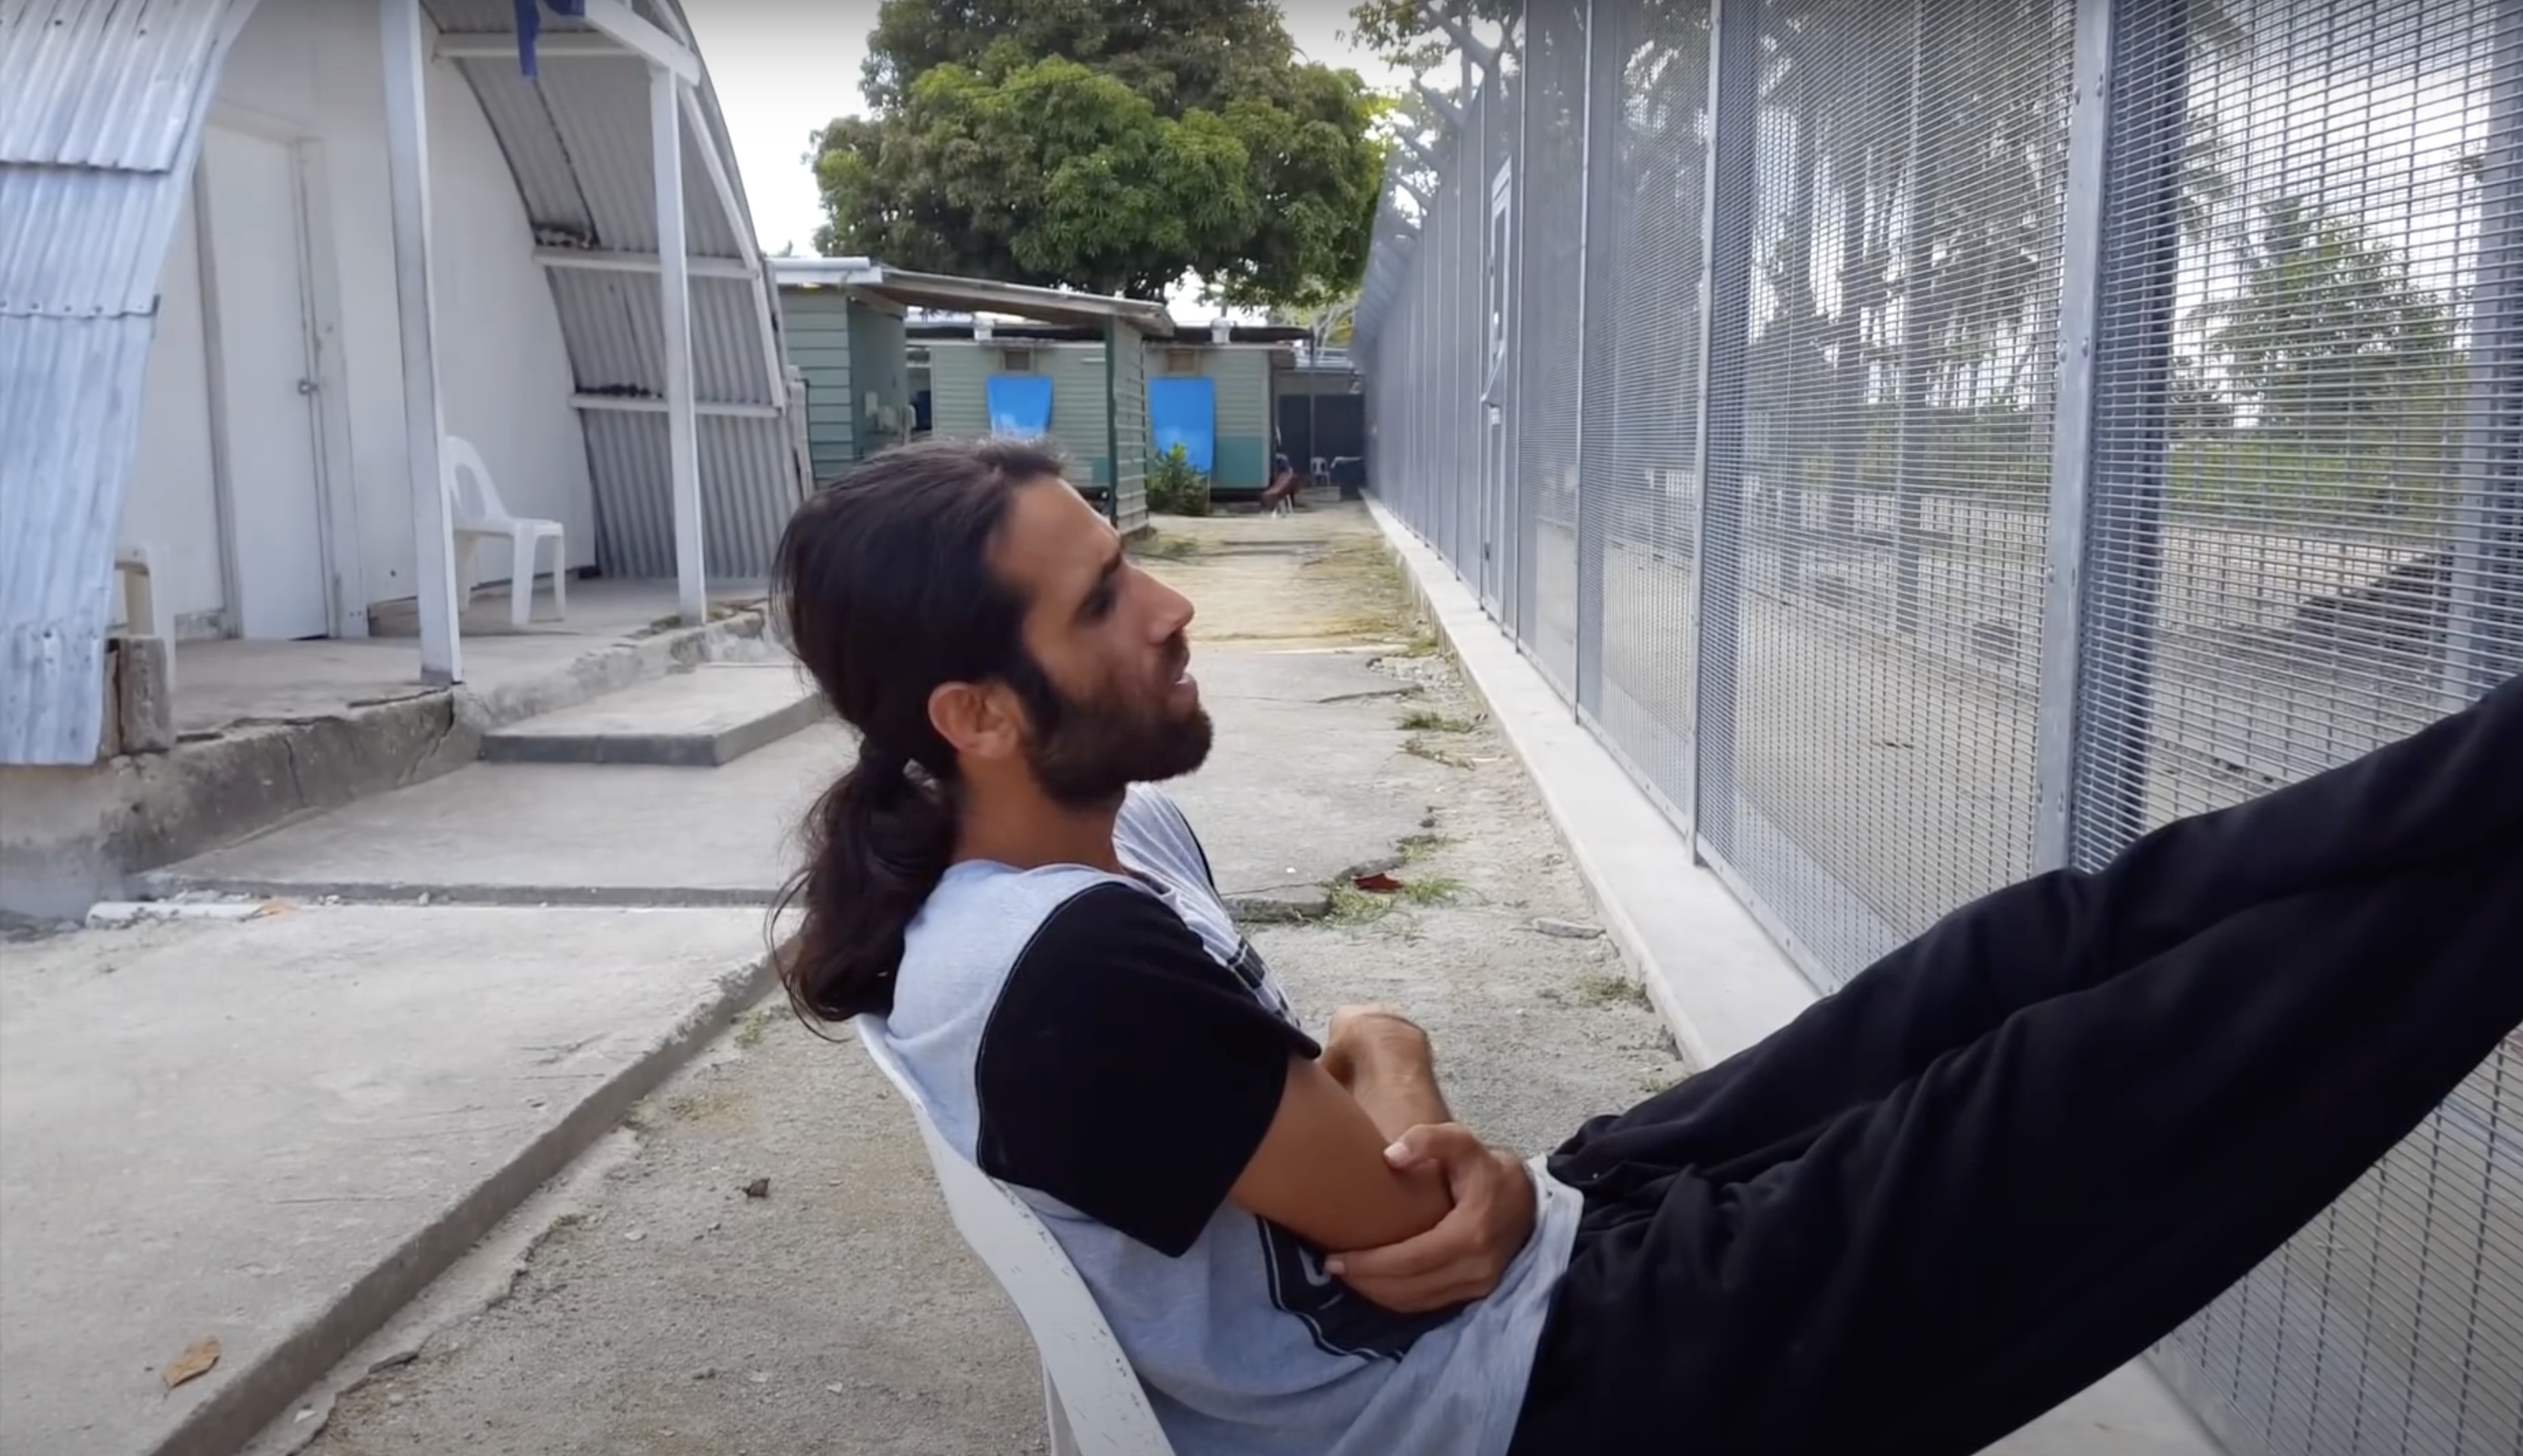 <p>Arash Kamali Sarvestani and Behrouz Boochani, <em>Chauka, Please Tell Us The Time</em> (2017), video still, depicting Behrouz Boochani by the fence at Manus Regional Processing Centre, before its closure and detainees were moved to other facilities on the island.</p>